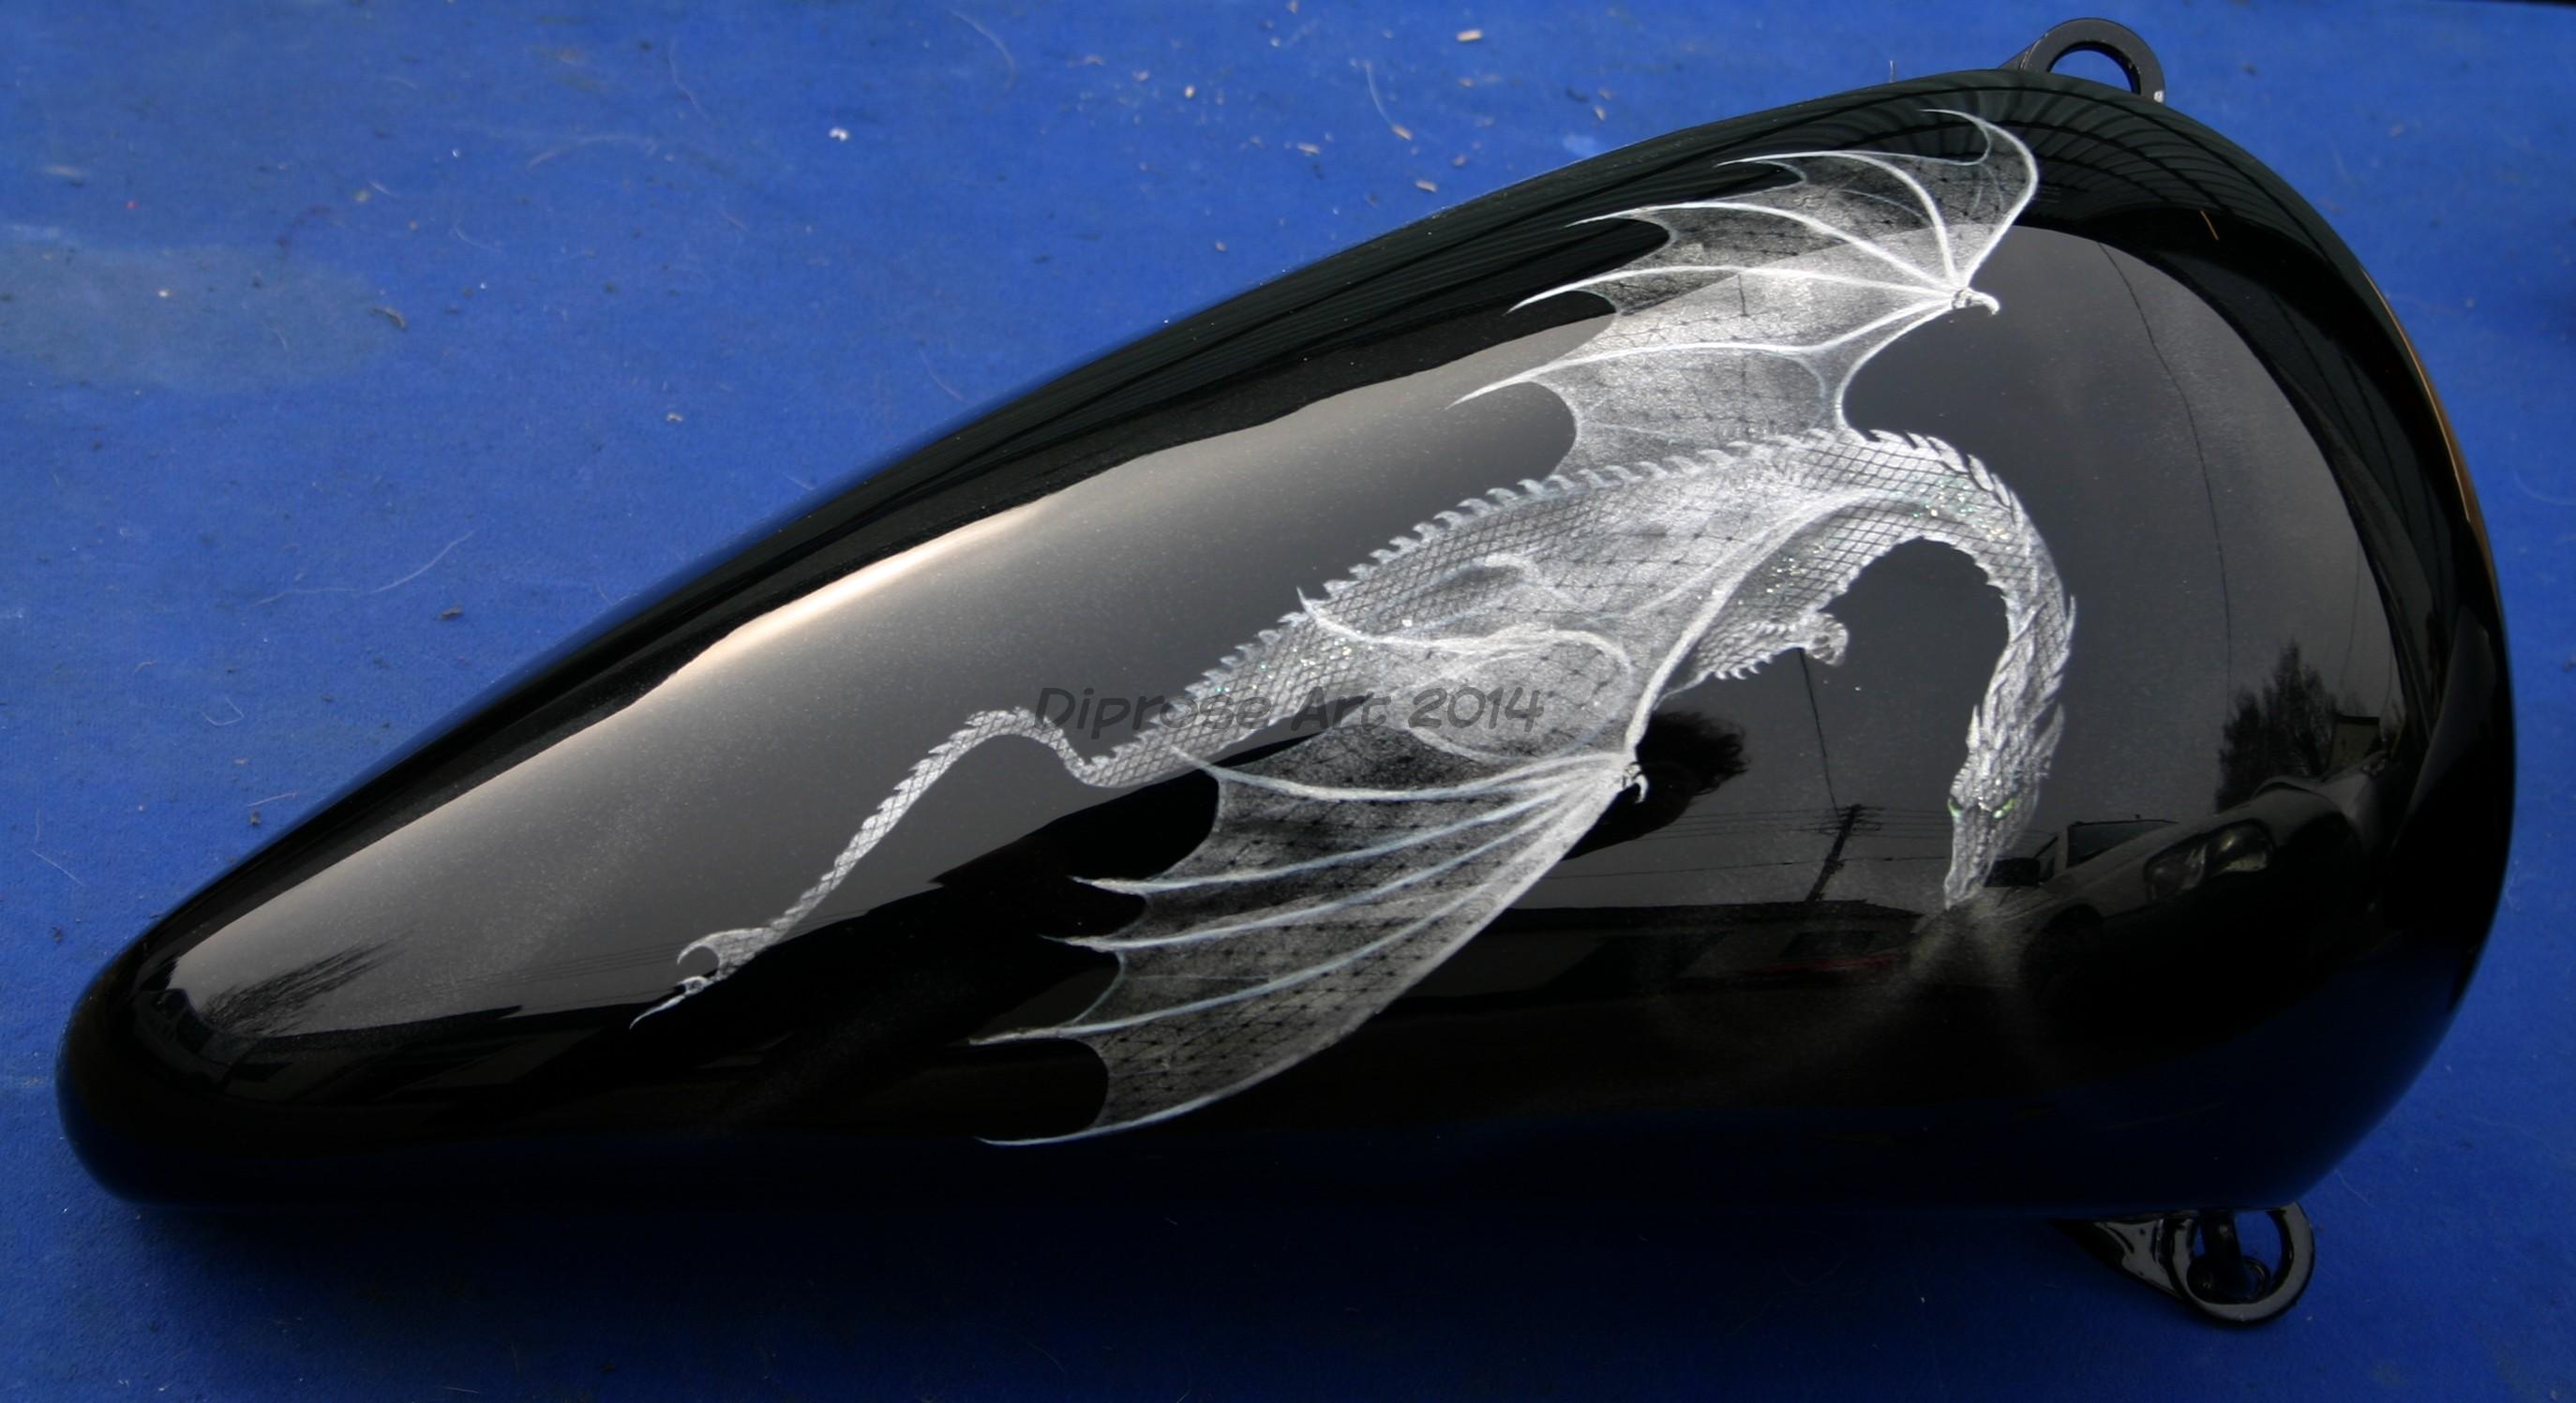 Automotive customisation - Silver Dragon Bike - Right Side - shown after lacquer which brings out metallics - single colour.